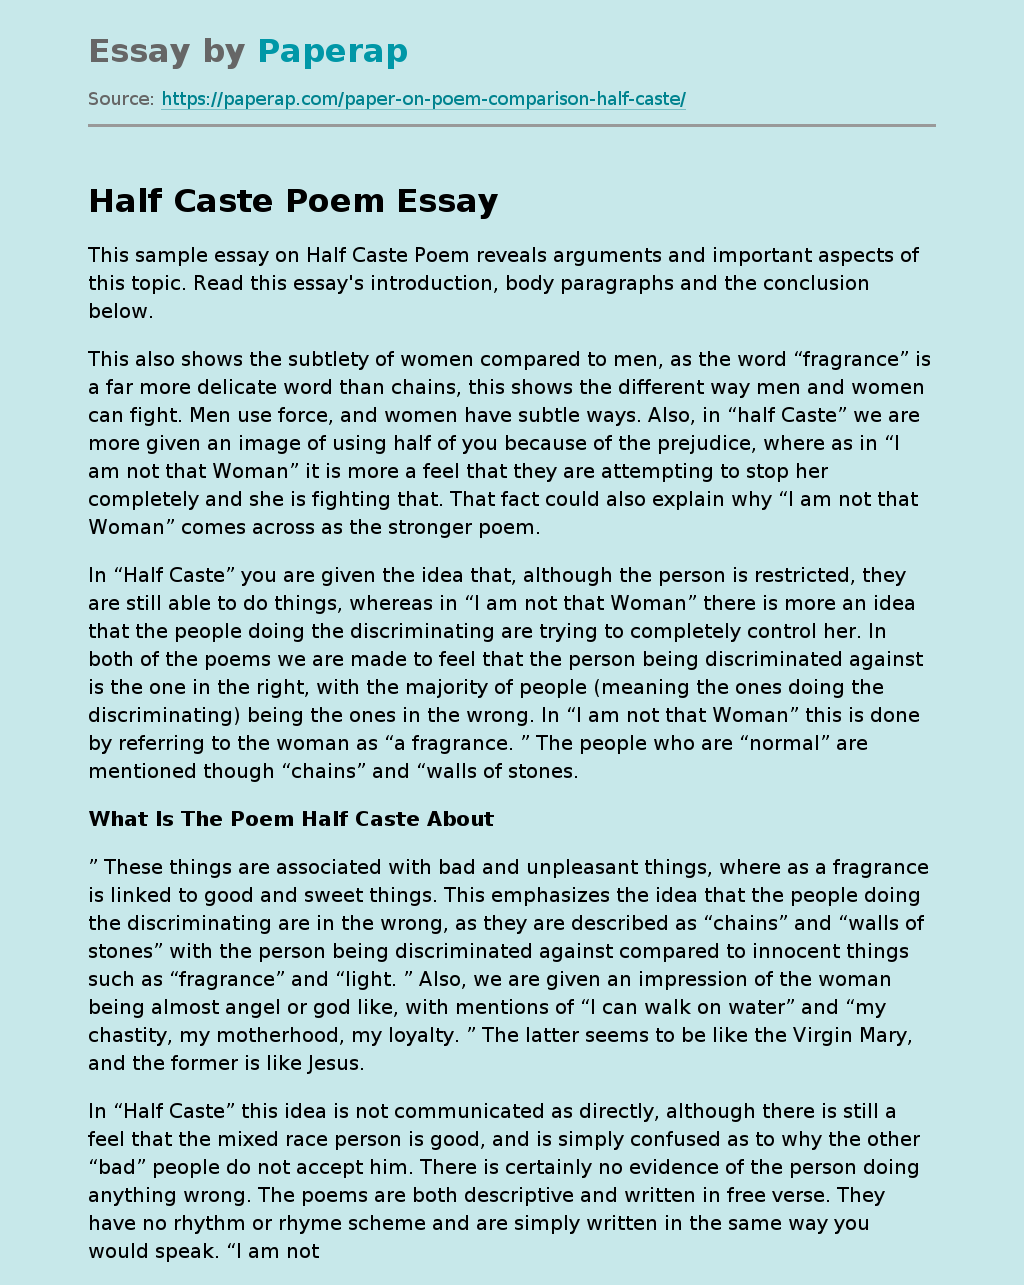 What Is The Poem Half Caste About